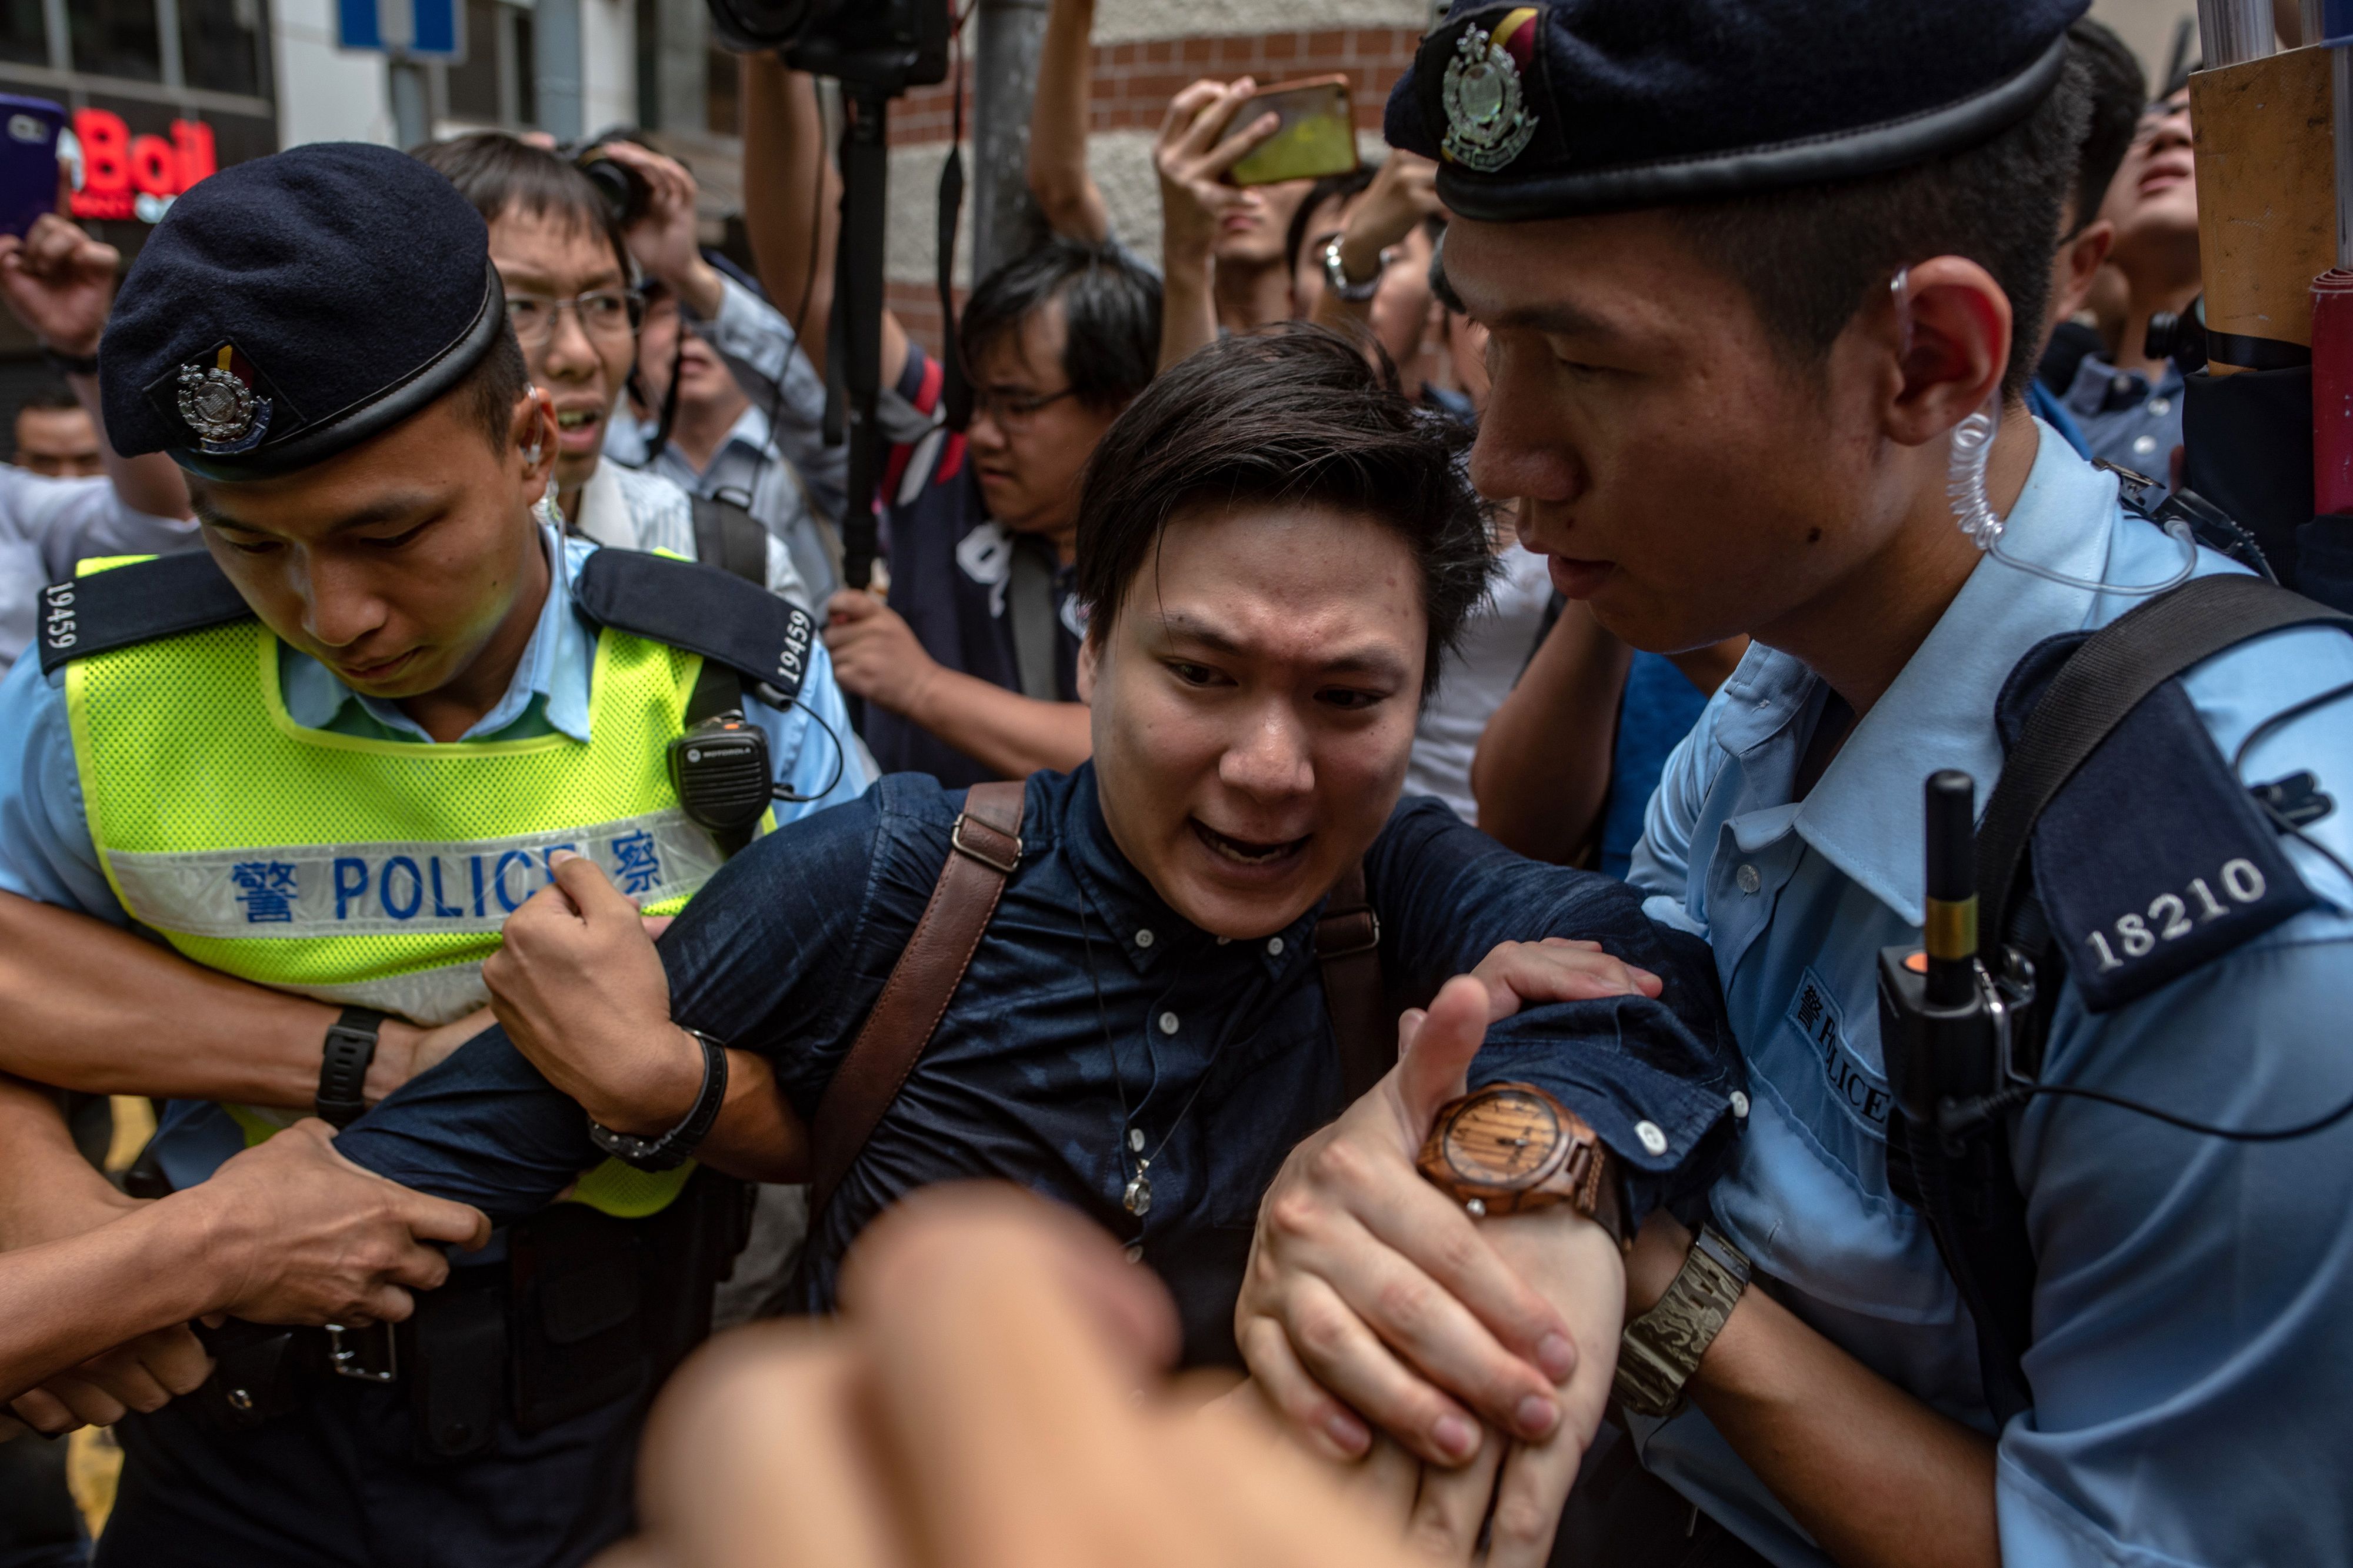 Pro-independence activist Wayne Chan is removed by police from a location outside the Foreign Correspondents' Club (FCC), as people protest ahead of a speech by pro-independence activist Andy Chan, in Hong Kong on August 14, 2018. (Philip Fong—AFP/Getty Images)